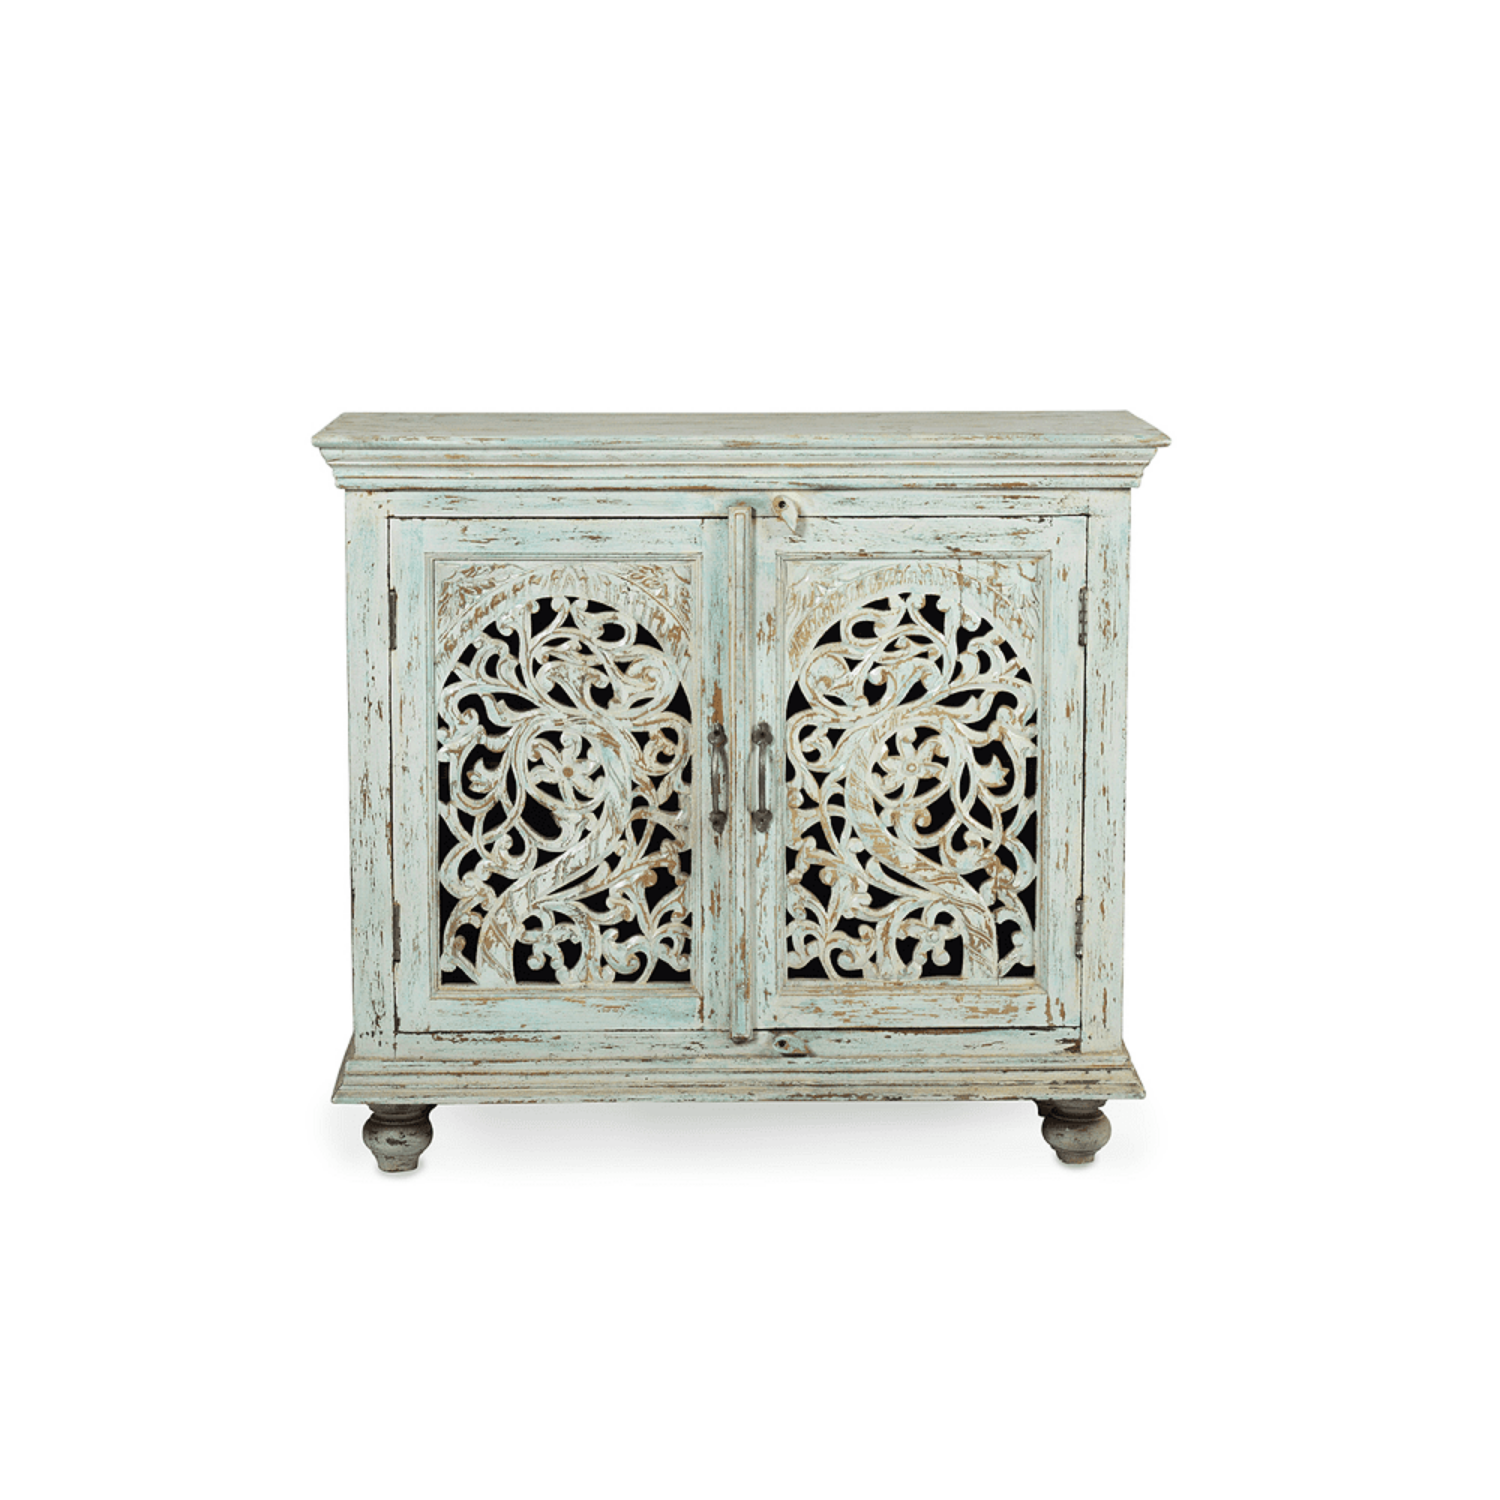 Distressed cabinet online india with storage